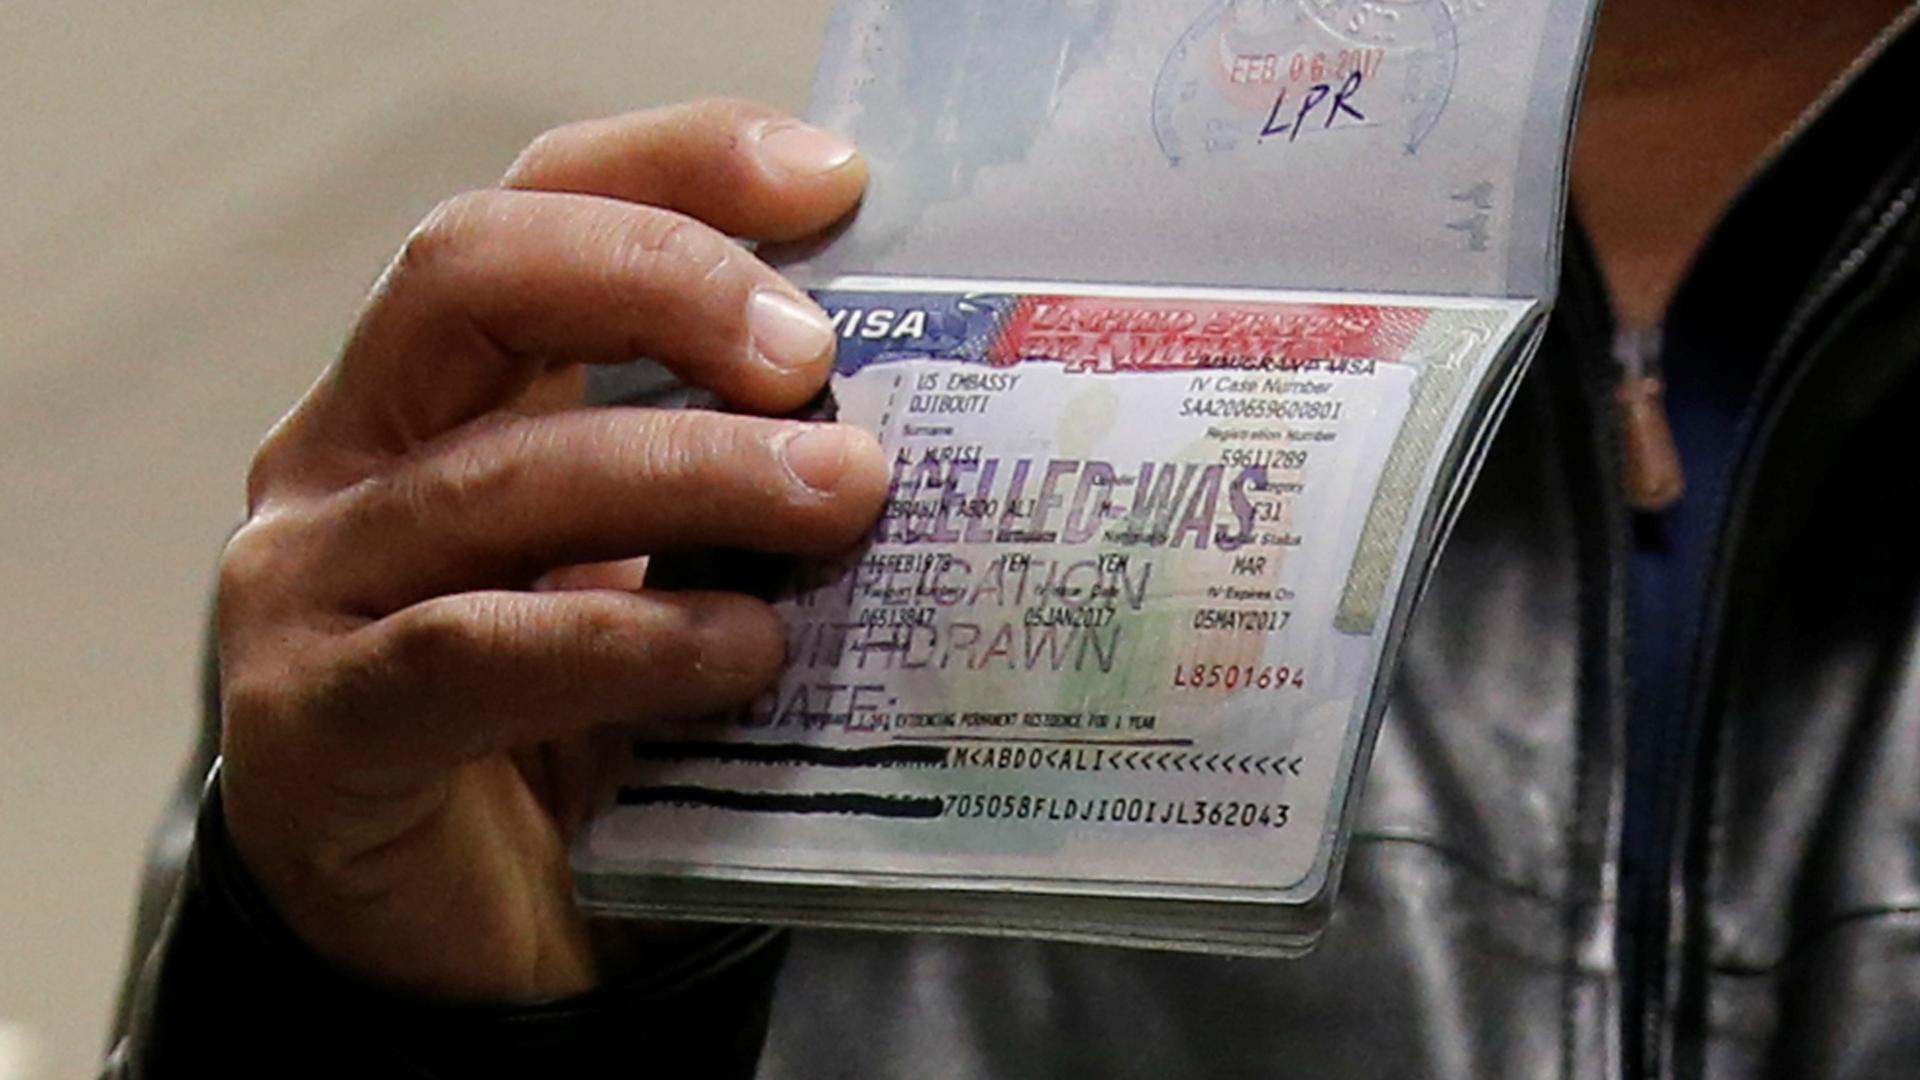 A Yemeni national who was denied entry into the US after President Donald Trump's first immigration and refugee visa ban shows the canceled visa in a passport, at Washington Dulles International Airport in Chantilly, Virginia, Feb. 6, 2017.